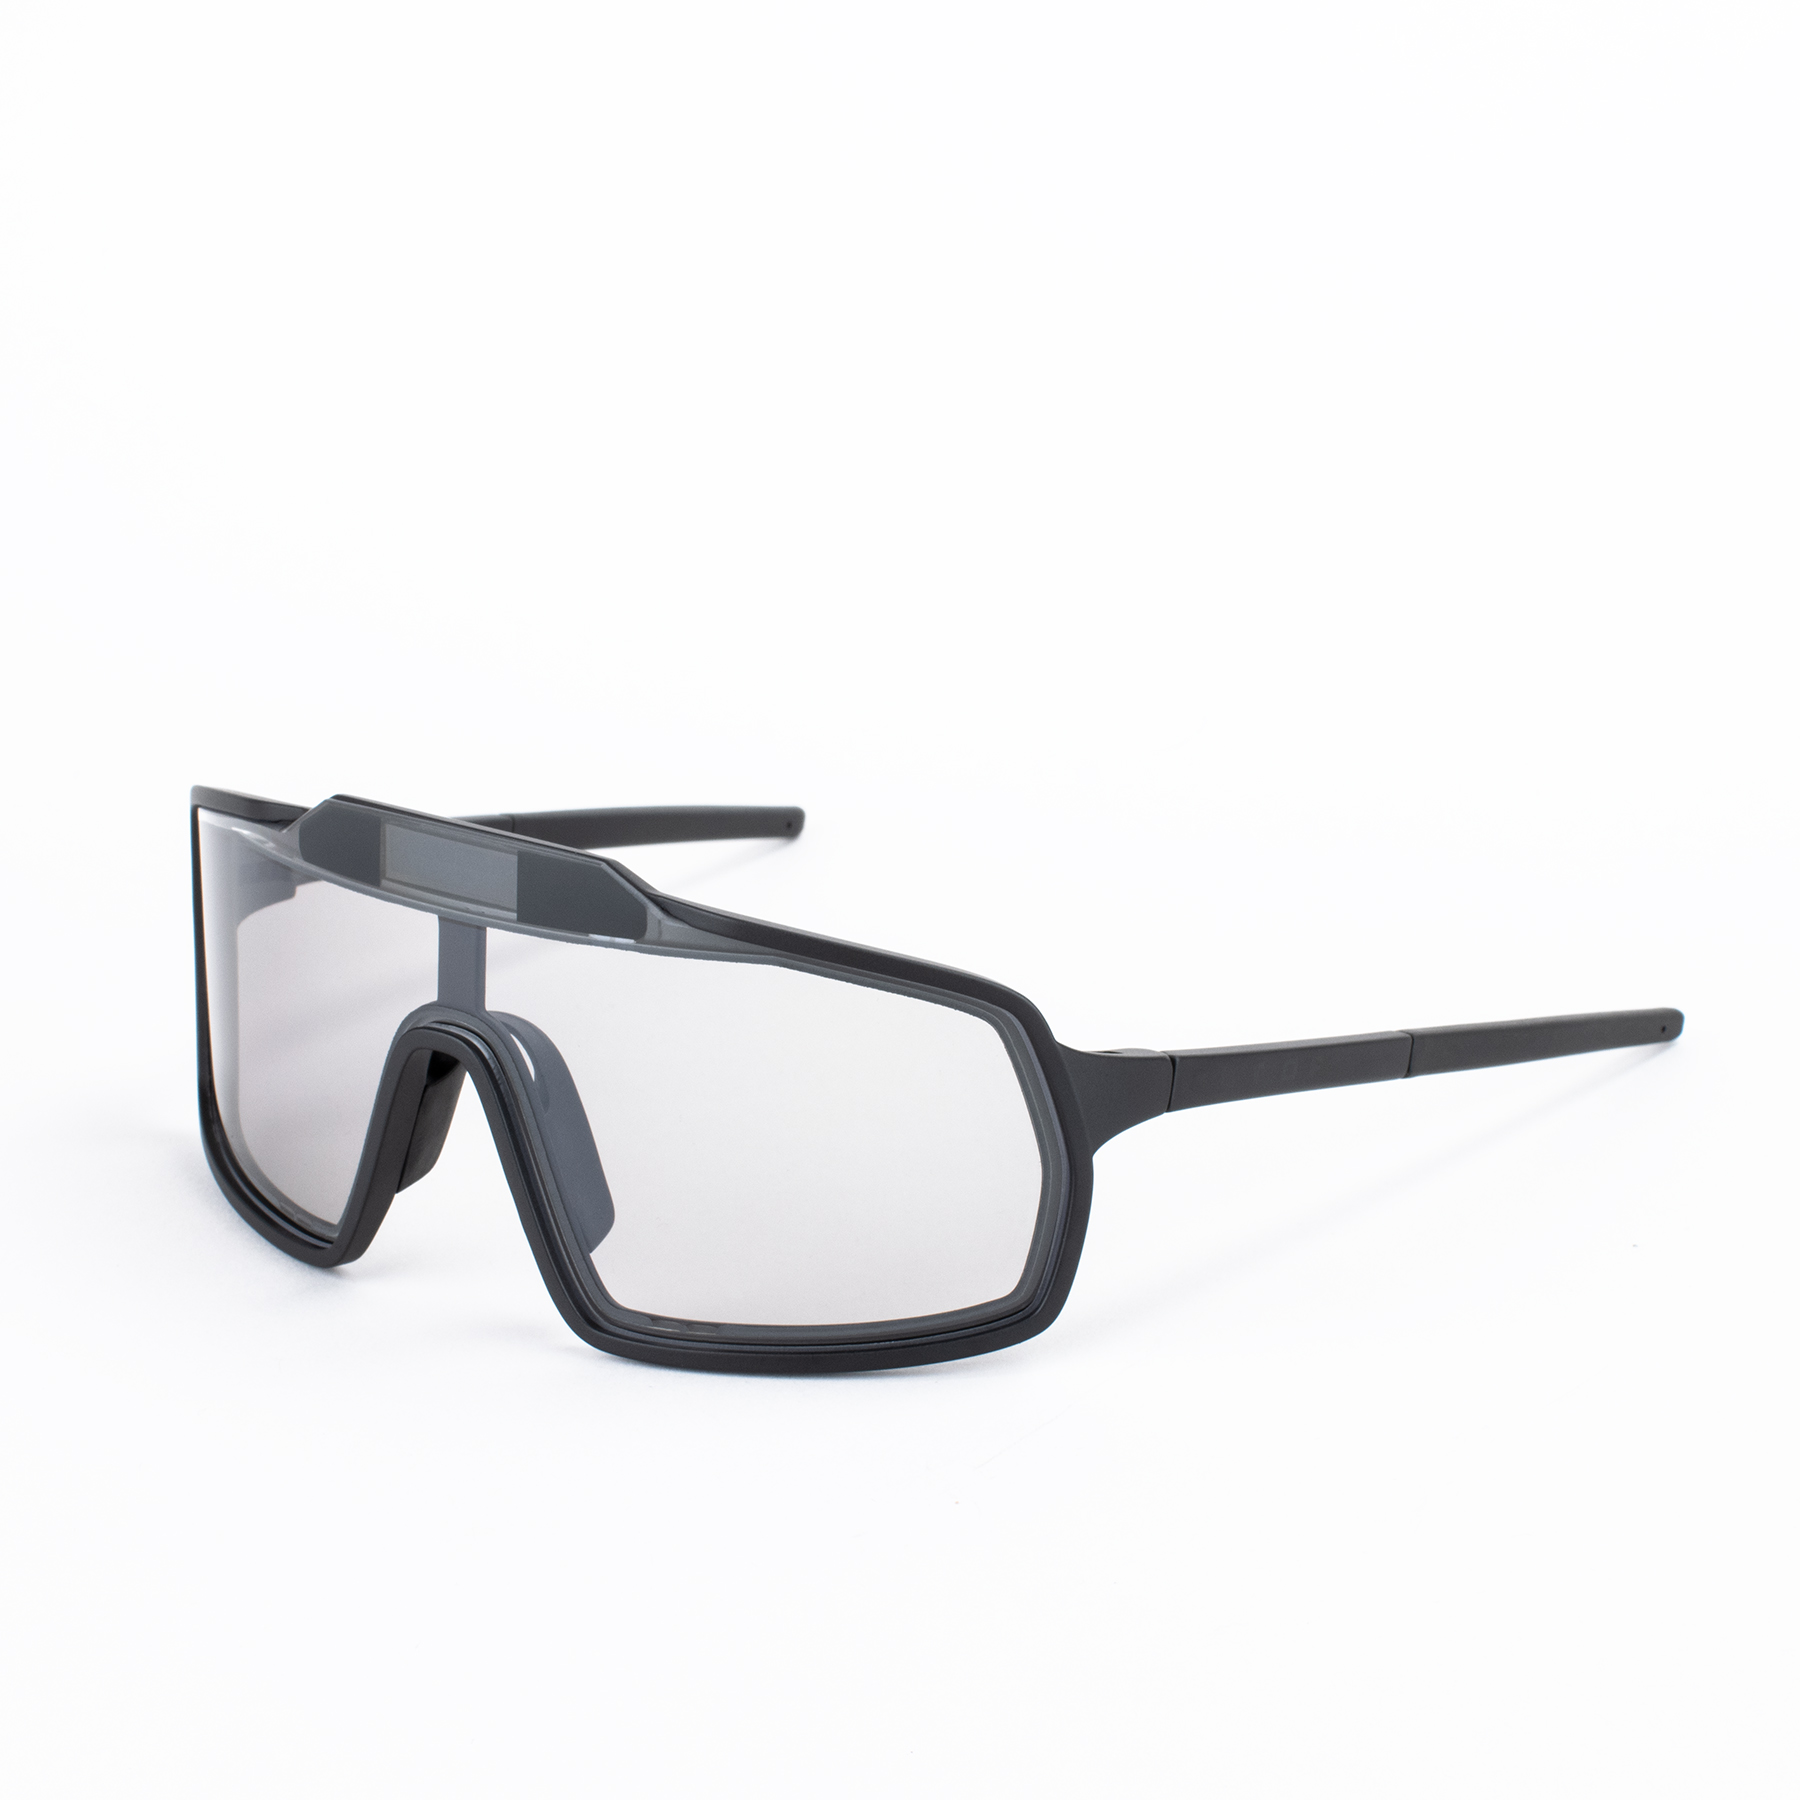 Bot 2 adapta electronic sunglasses with IRID clear lens